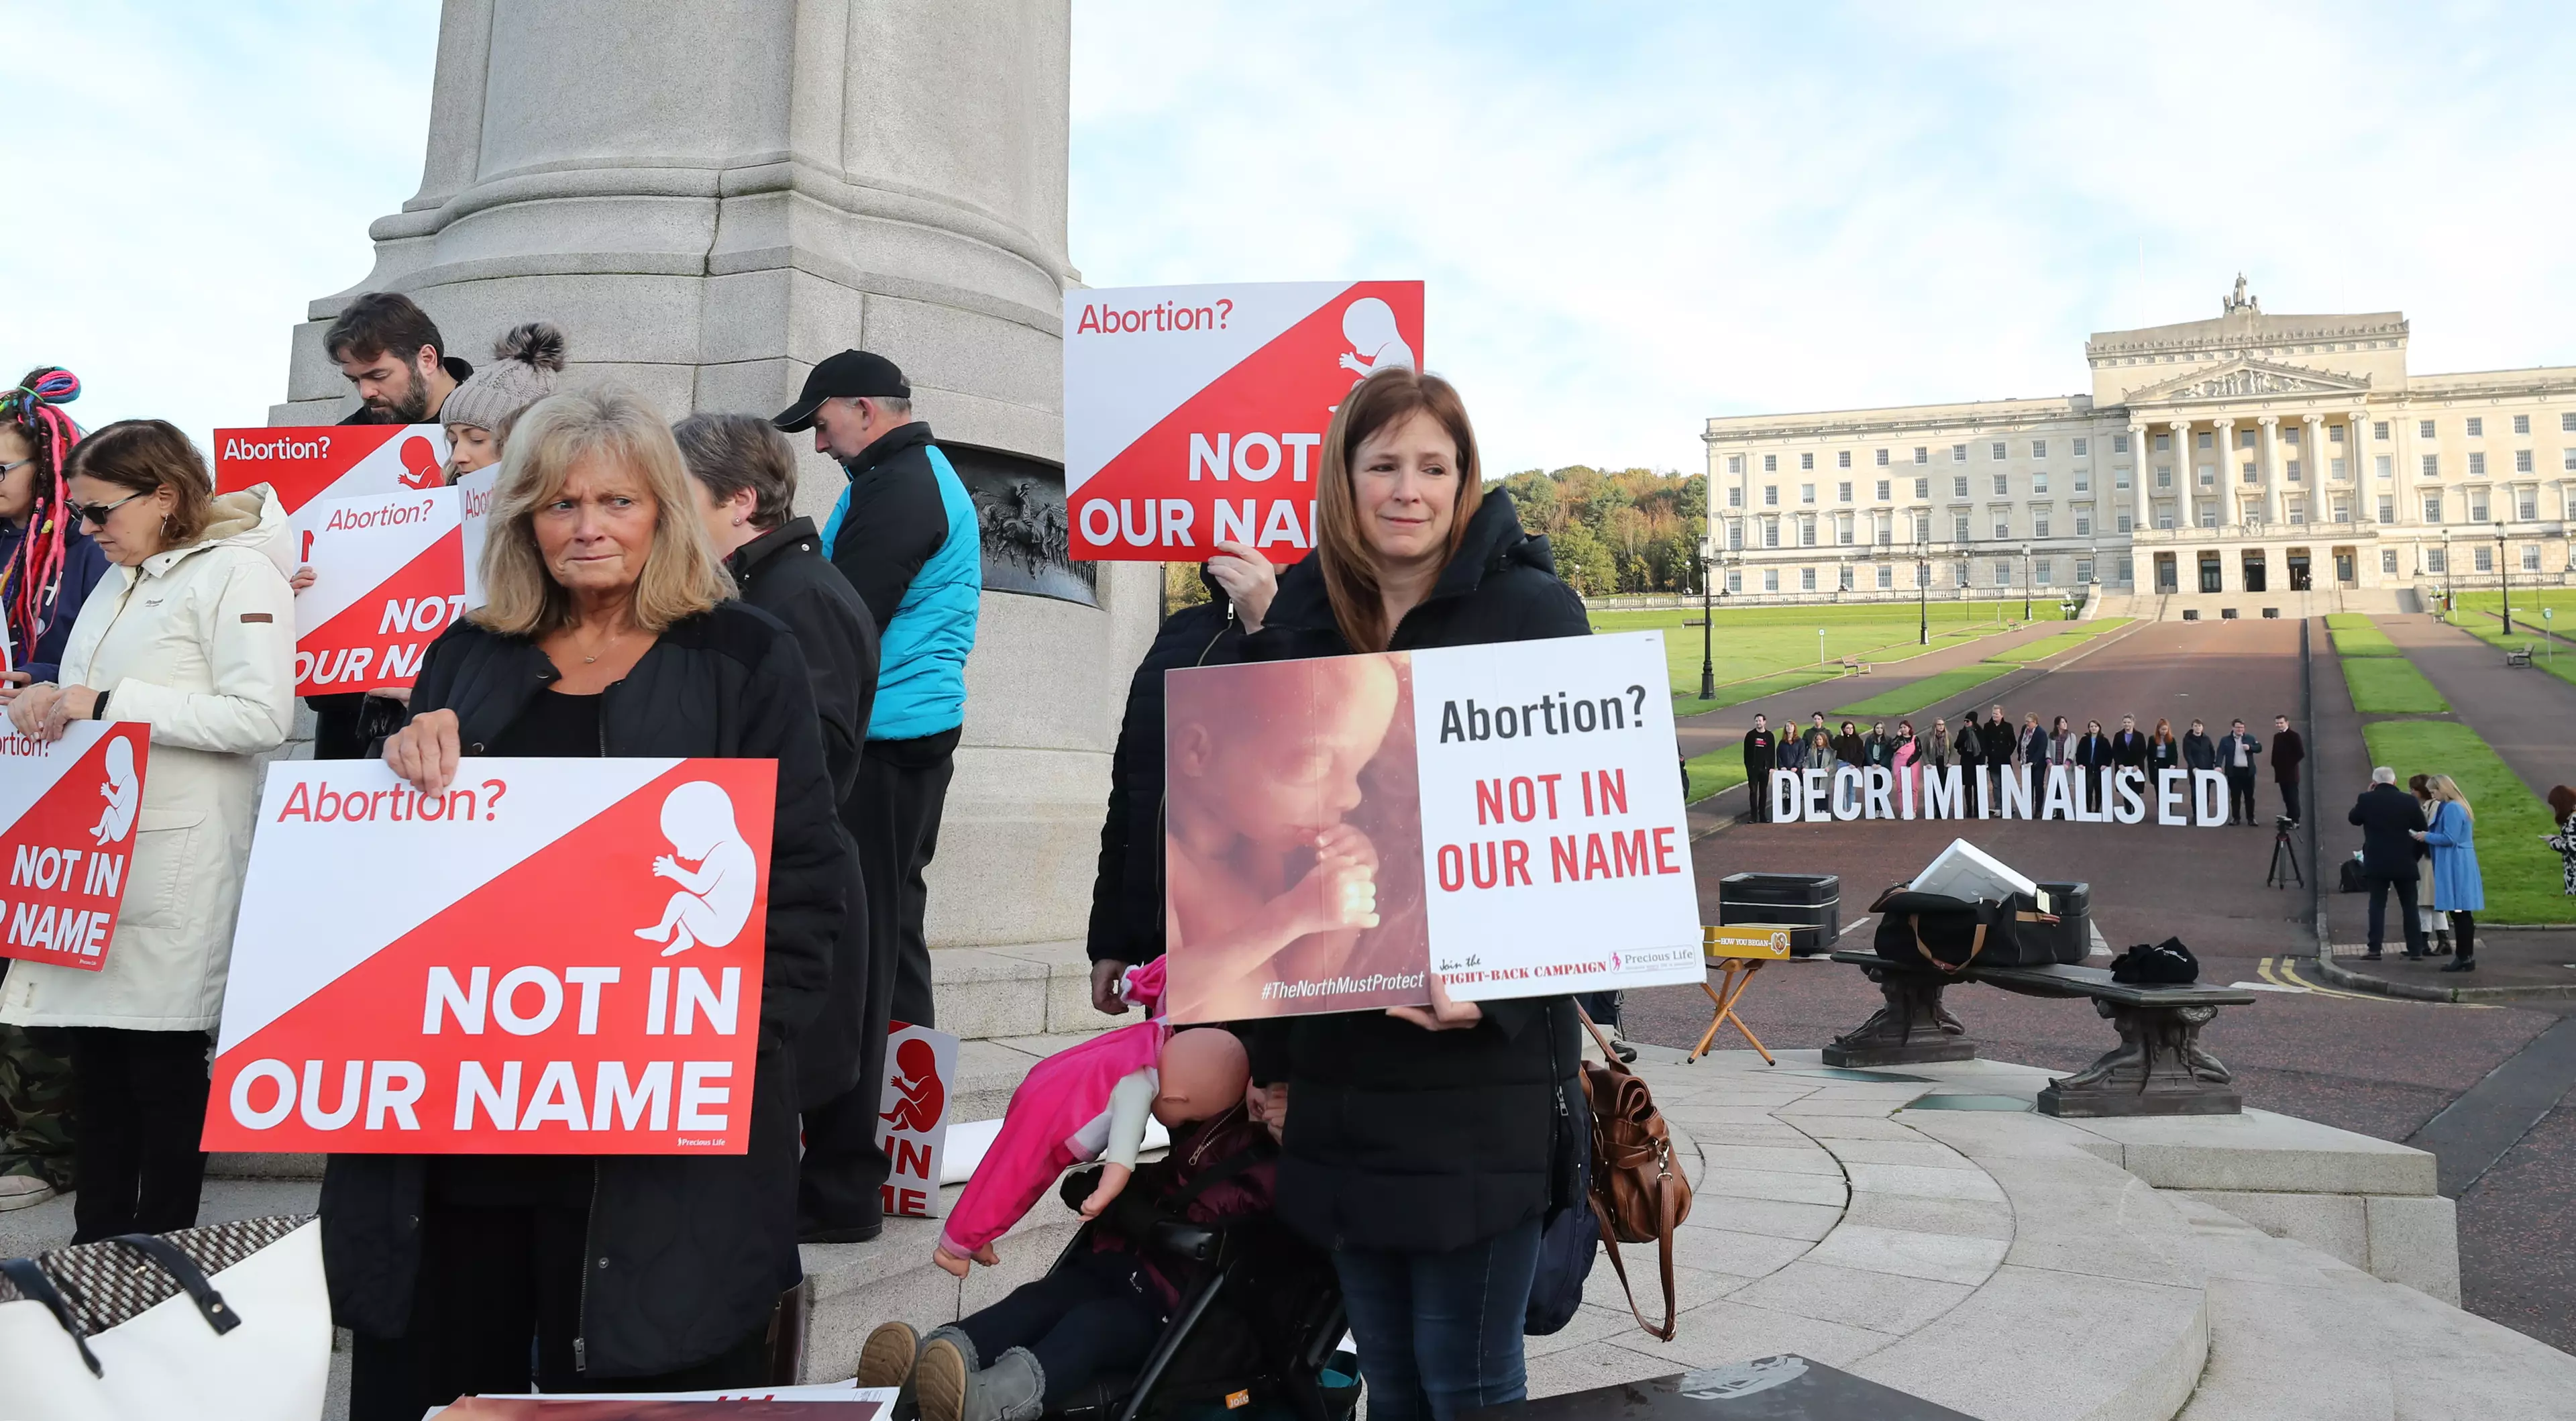 Despite wide opinion that abortion being illegal is draconian, many still campaign for pro life. (